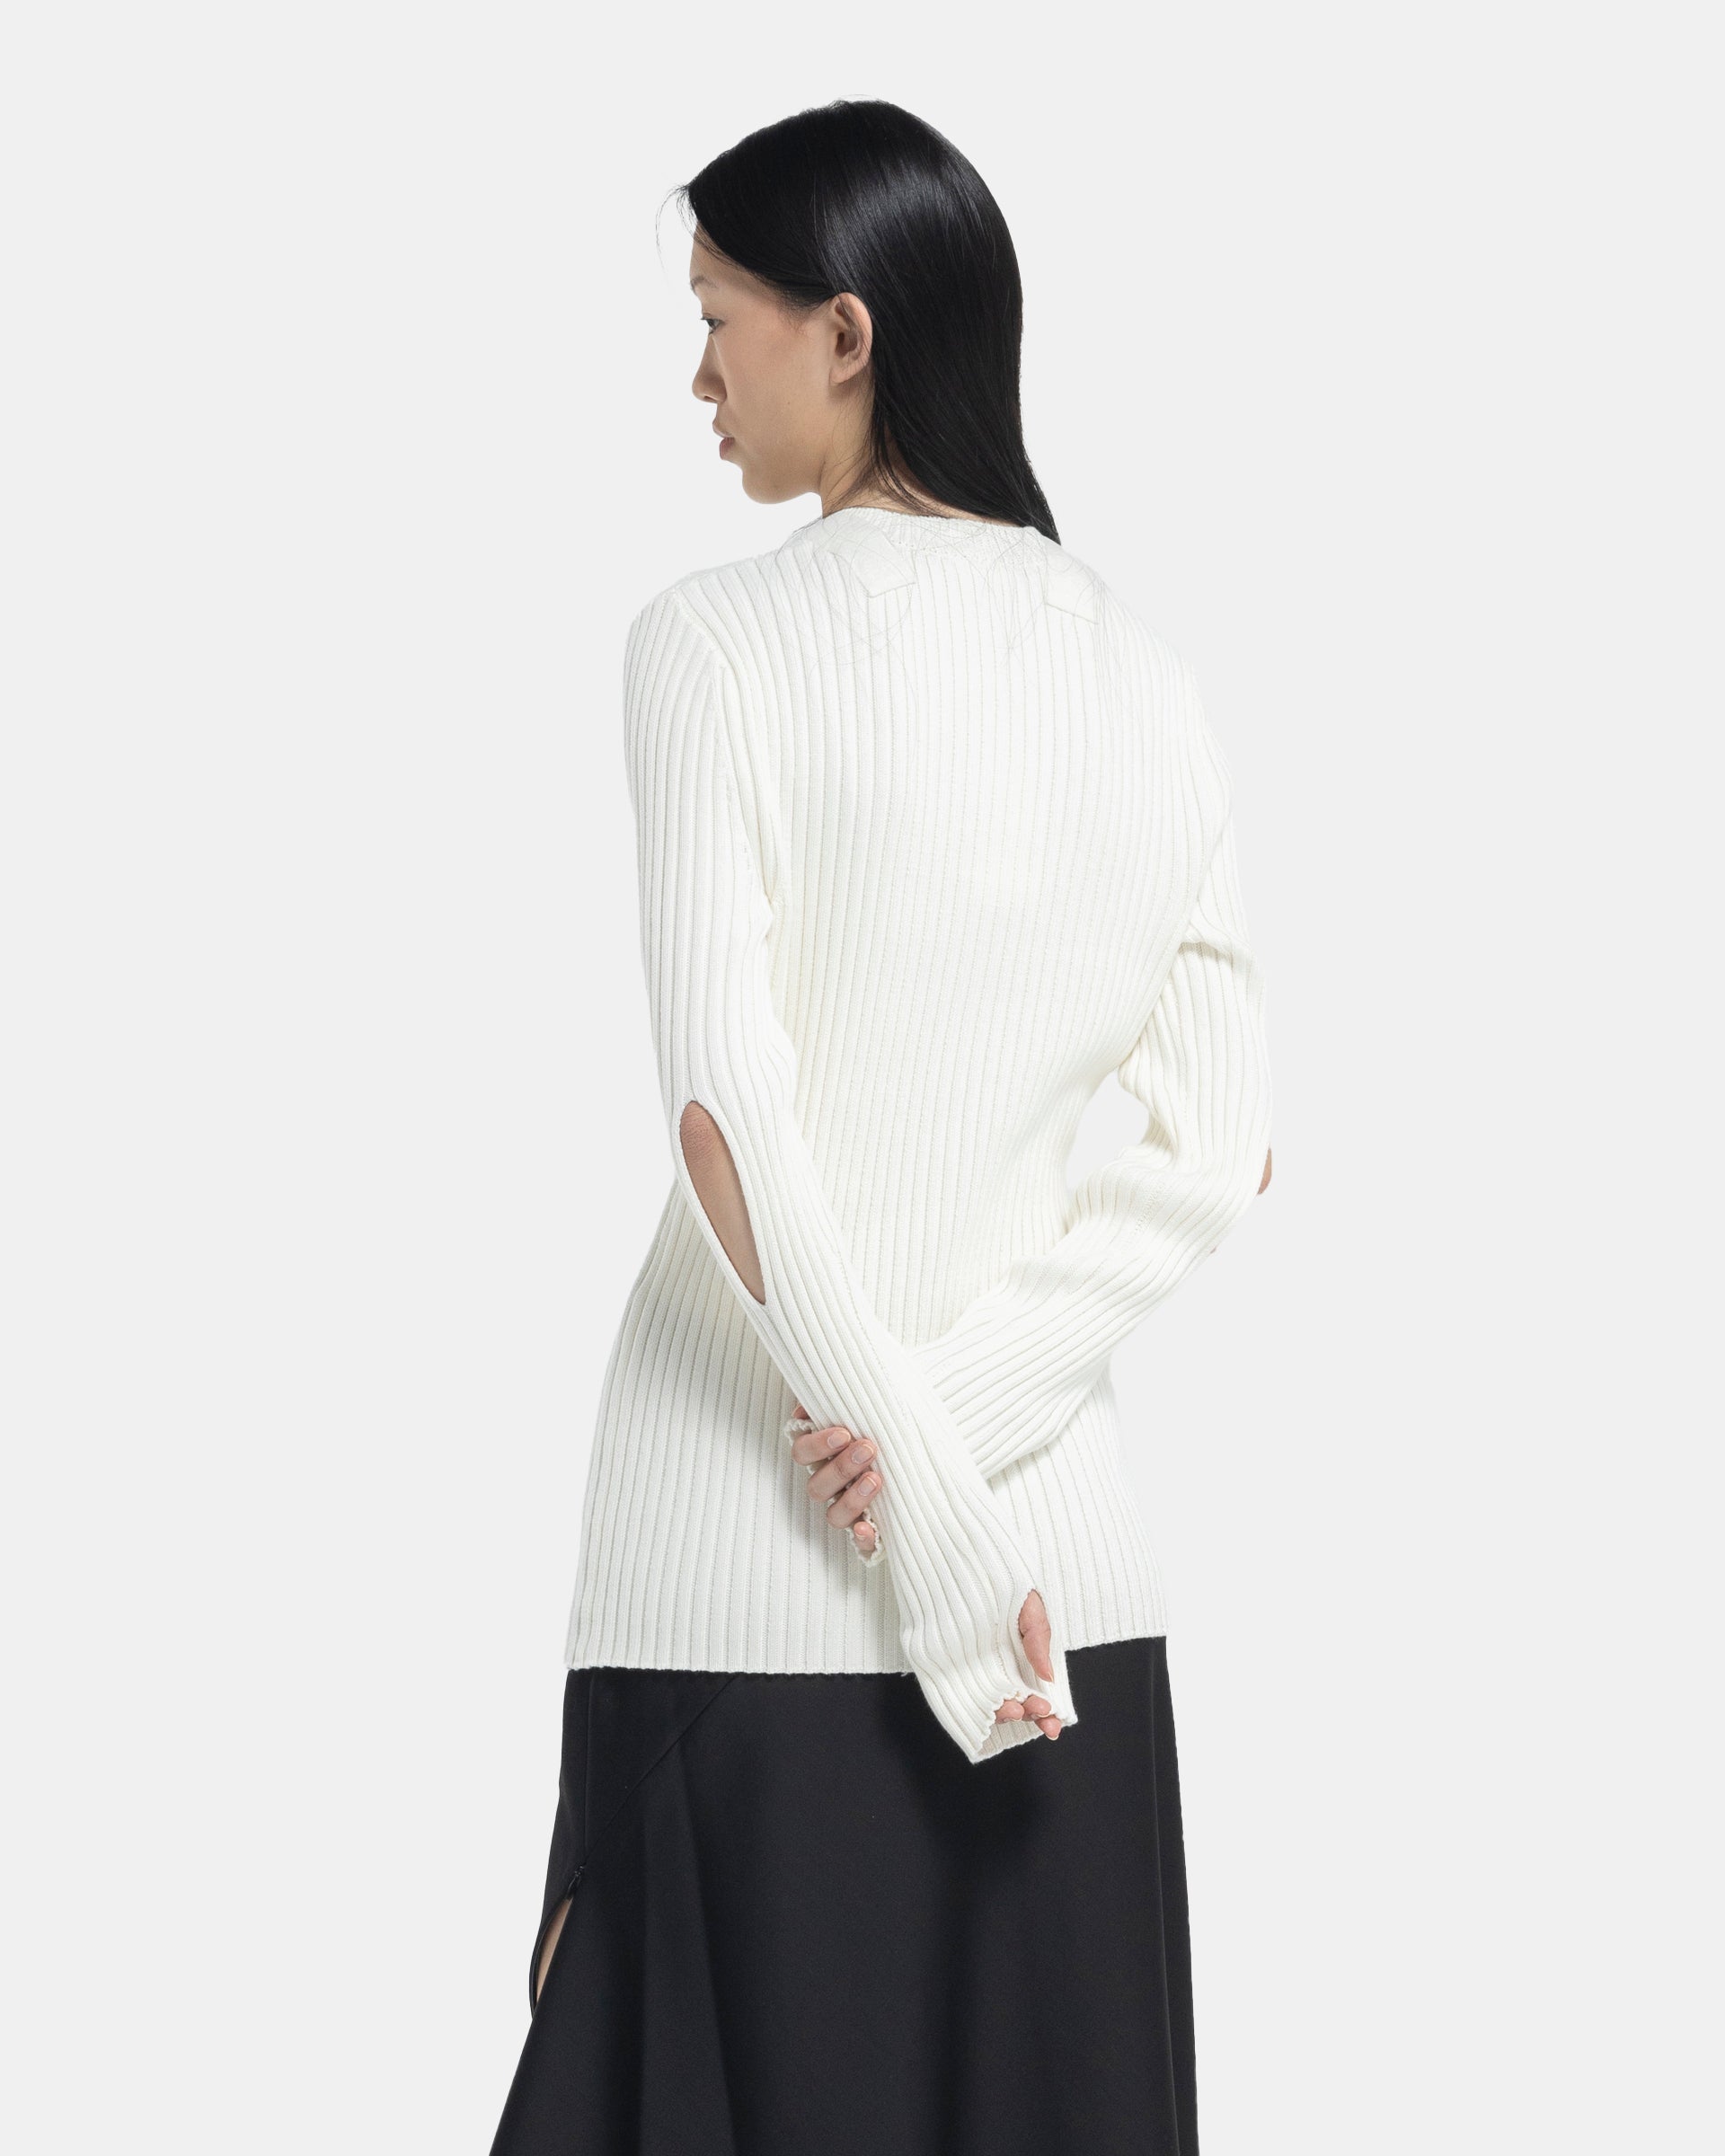 Strap Knit Crew in Ivory